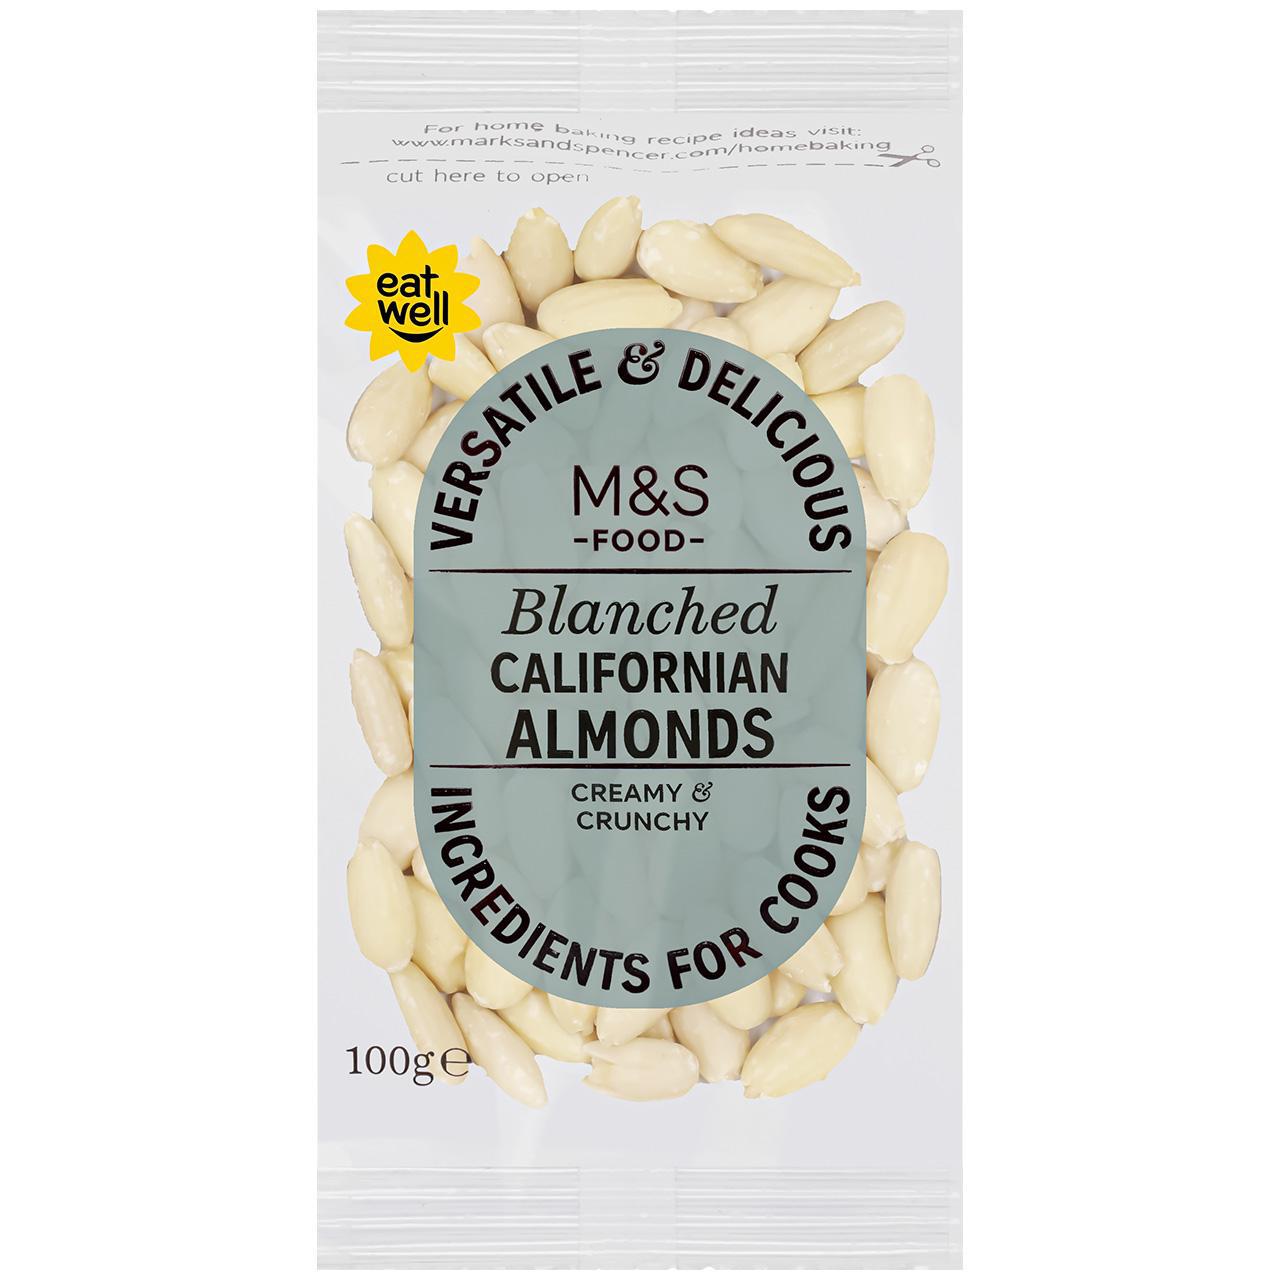 M&S Blanched Californian Almonds 100g